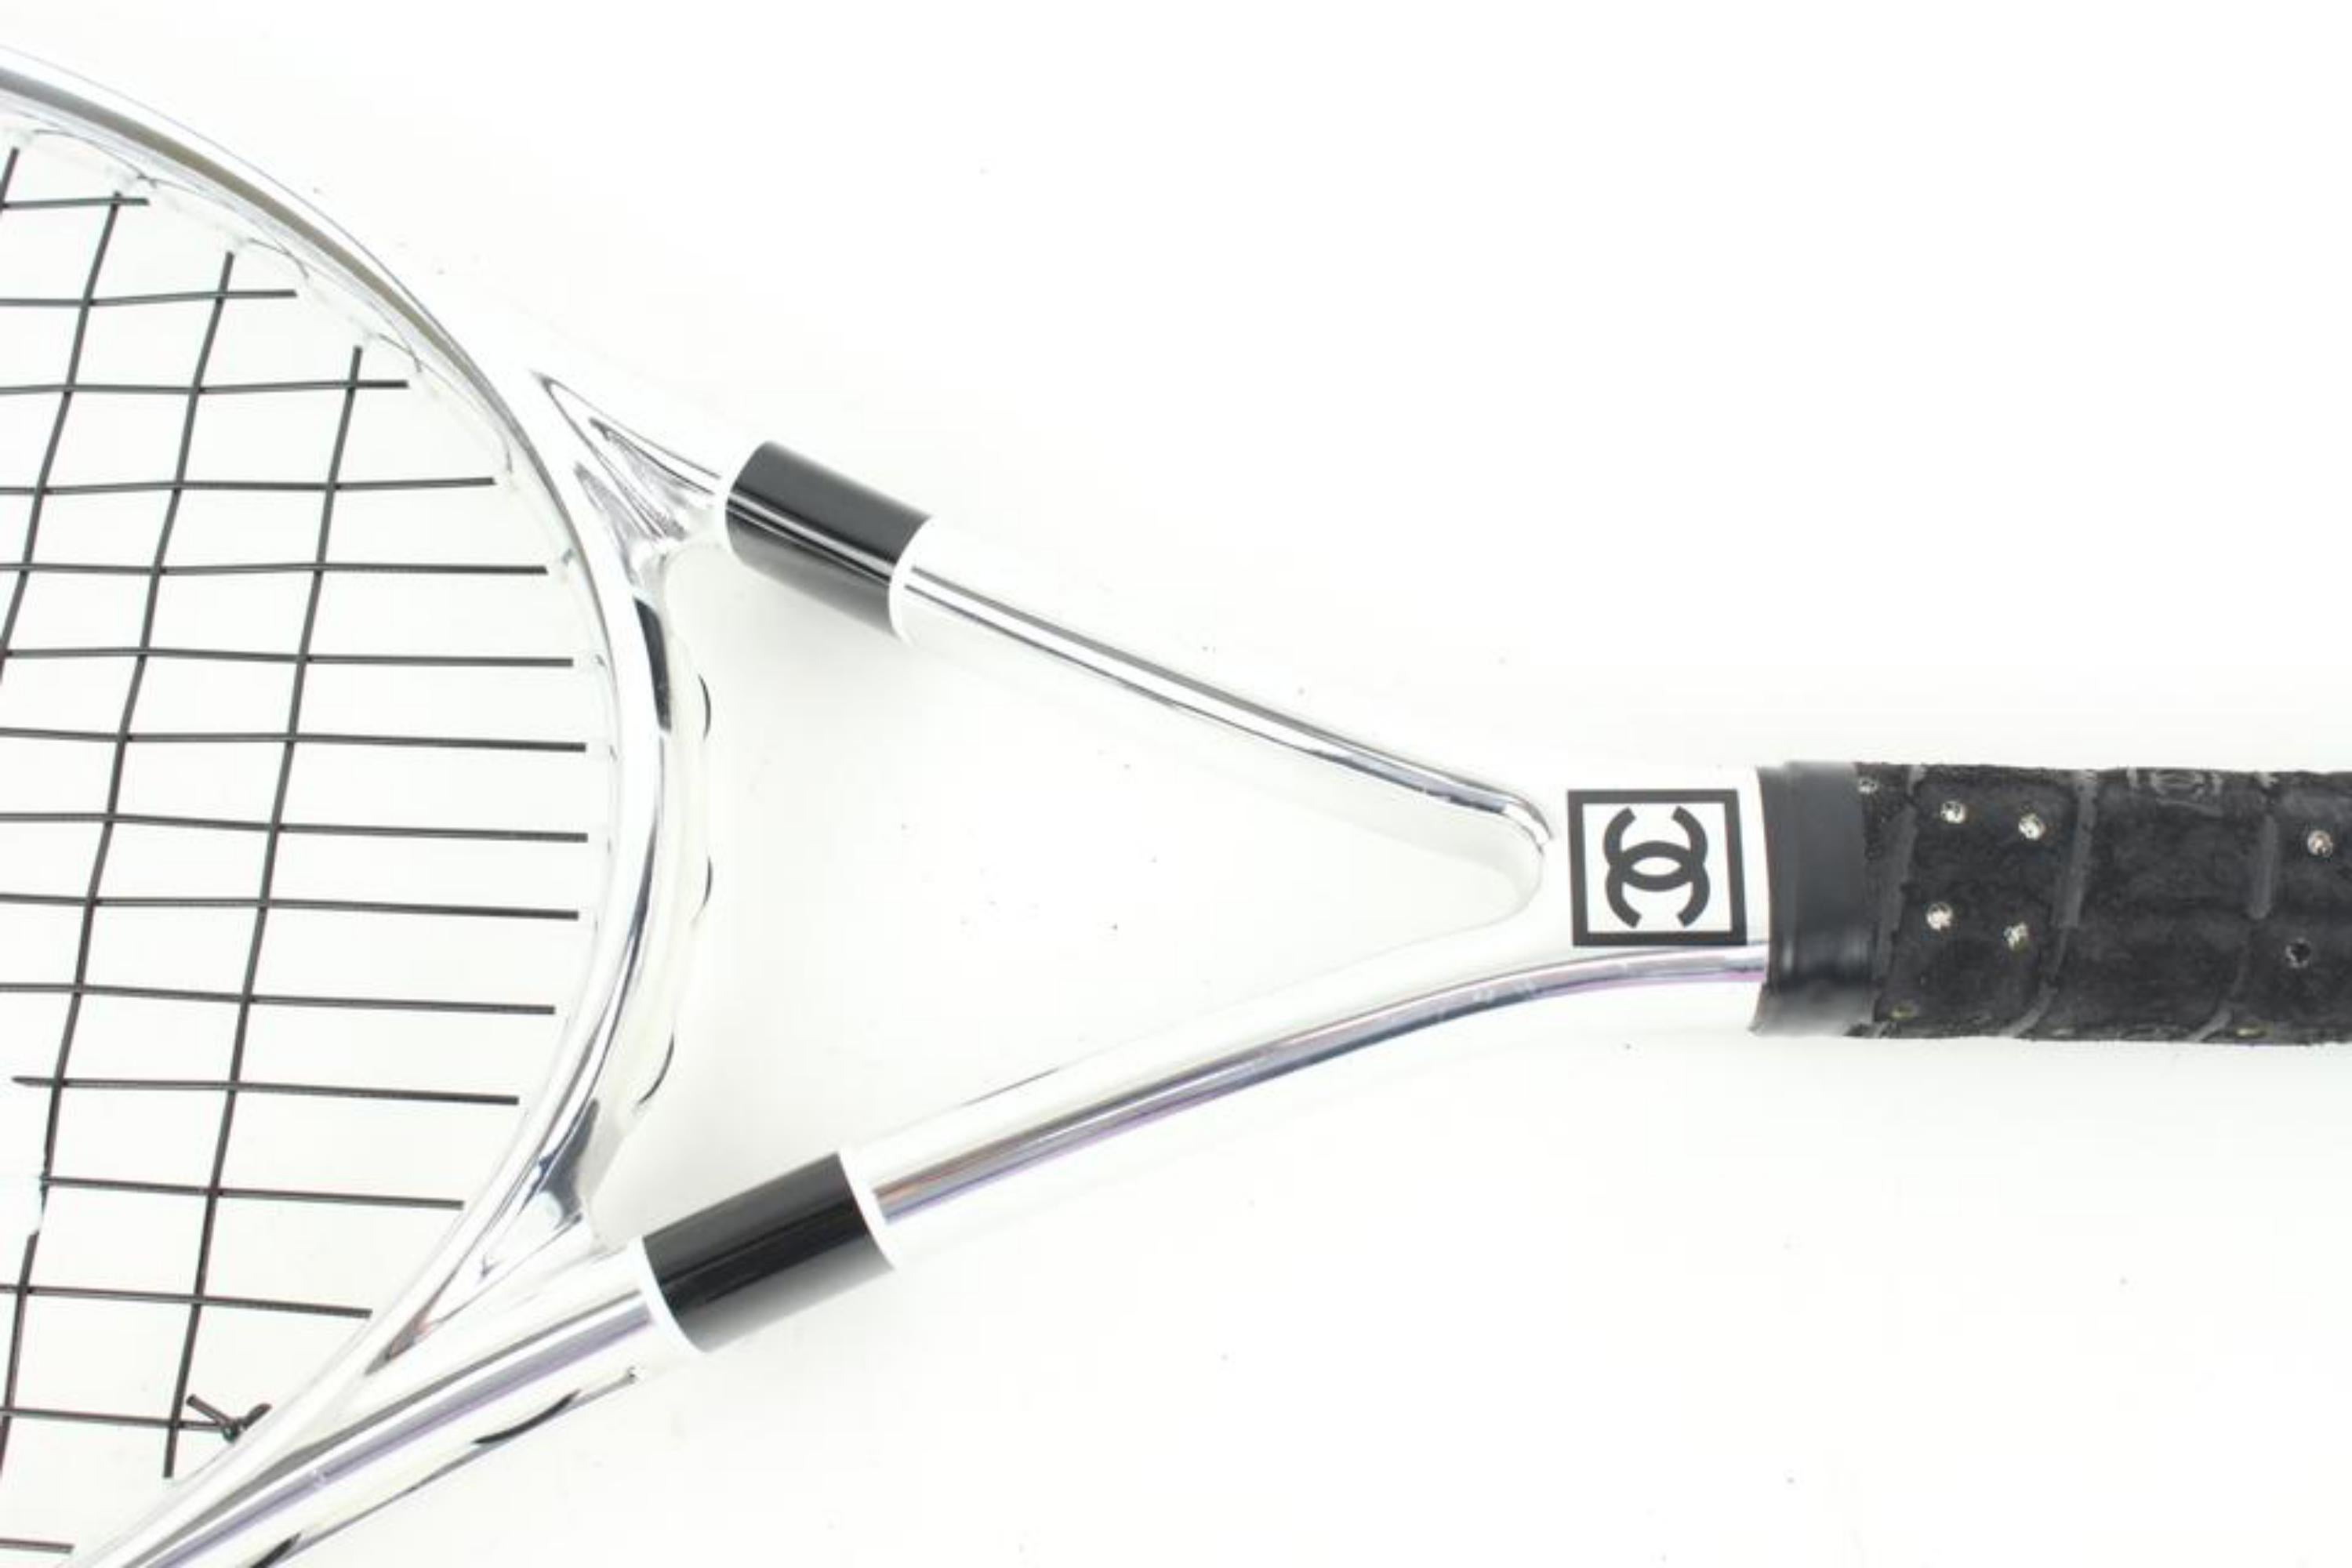 Chanel Rare CC Logo Tennis Racquet Sports Racket with Carrying Case s210ck65 For Sale 4